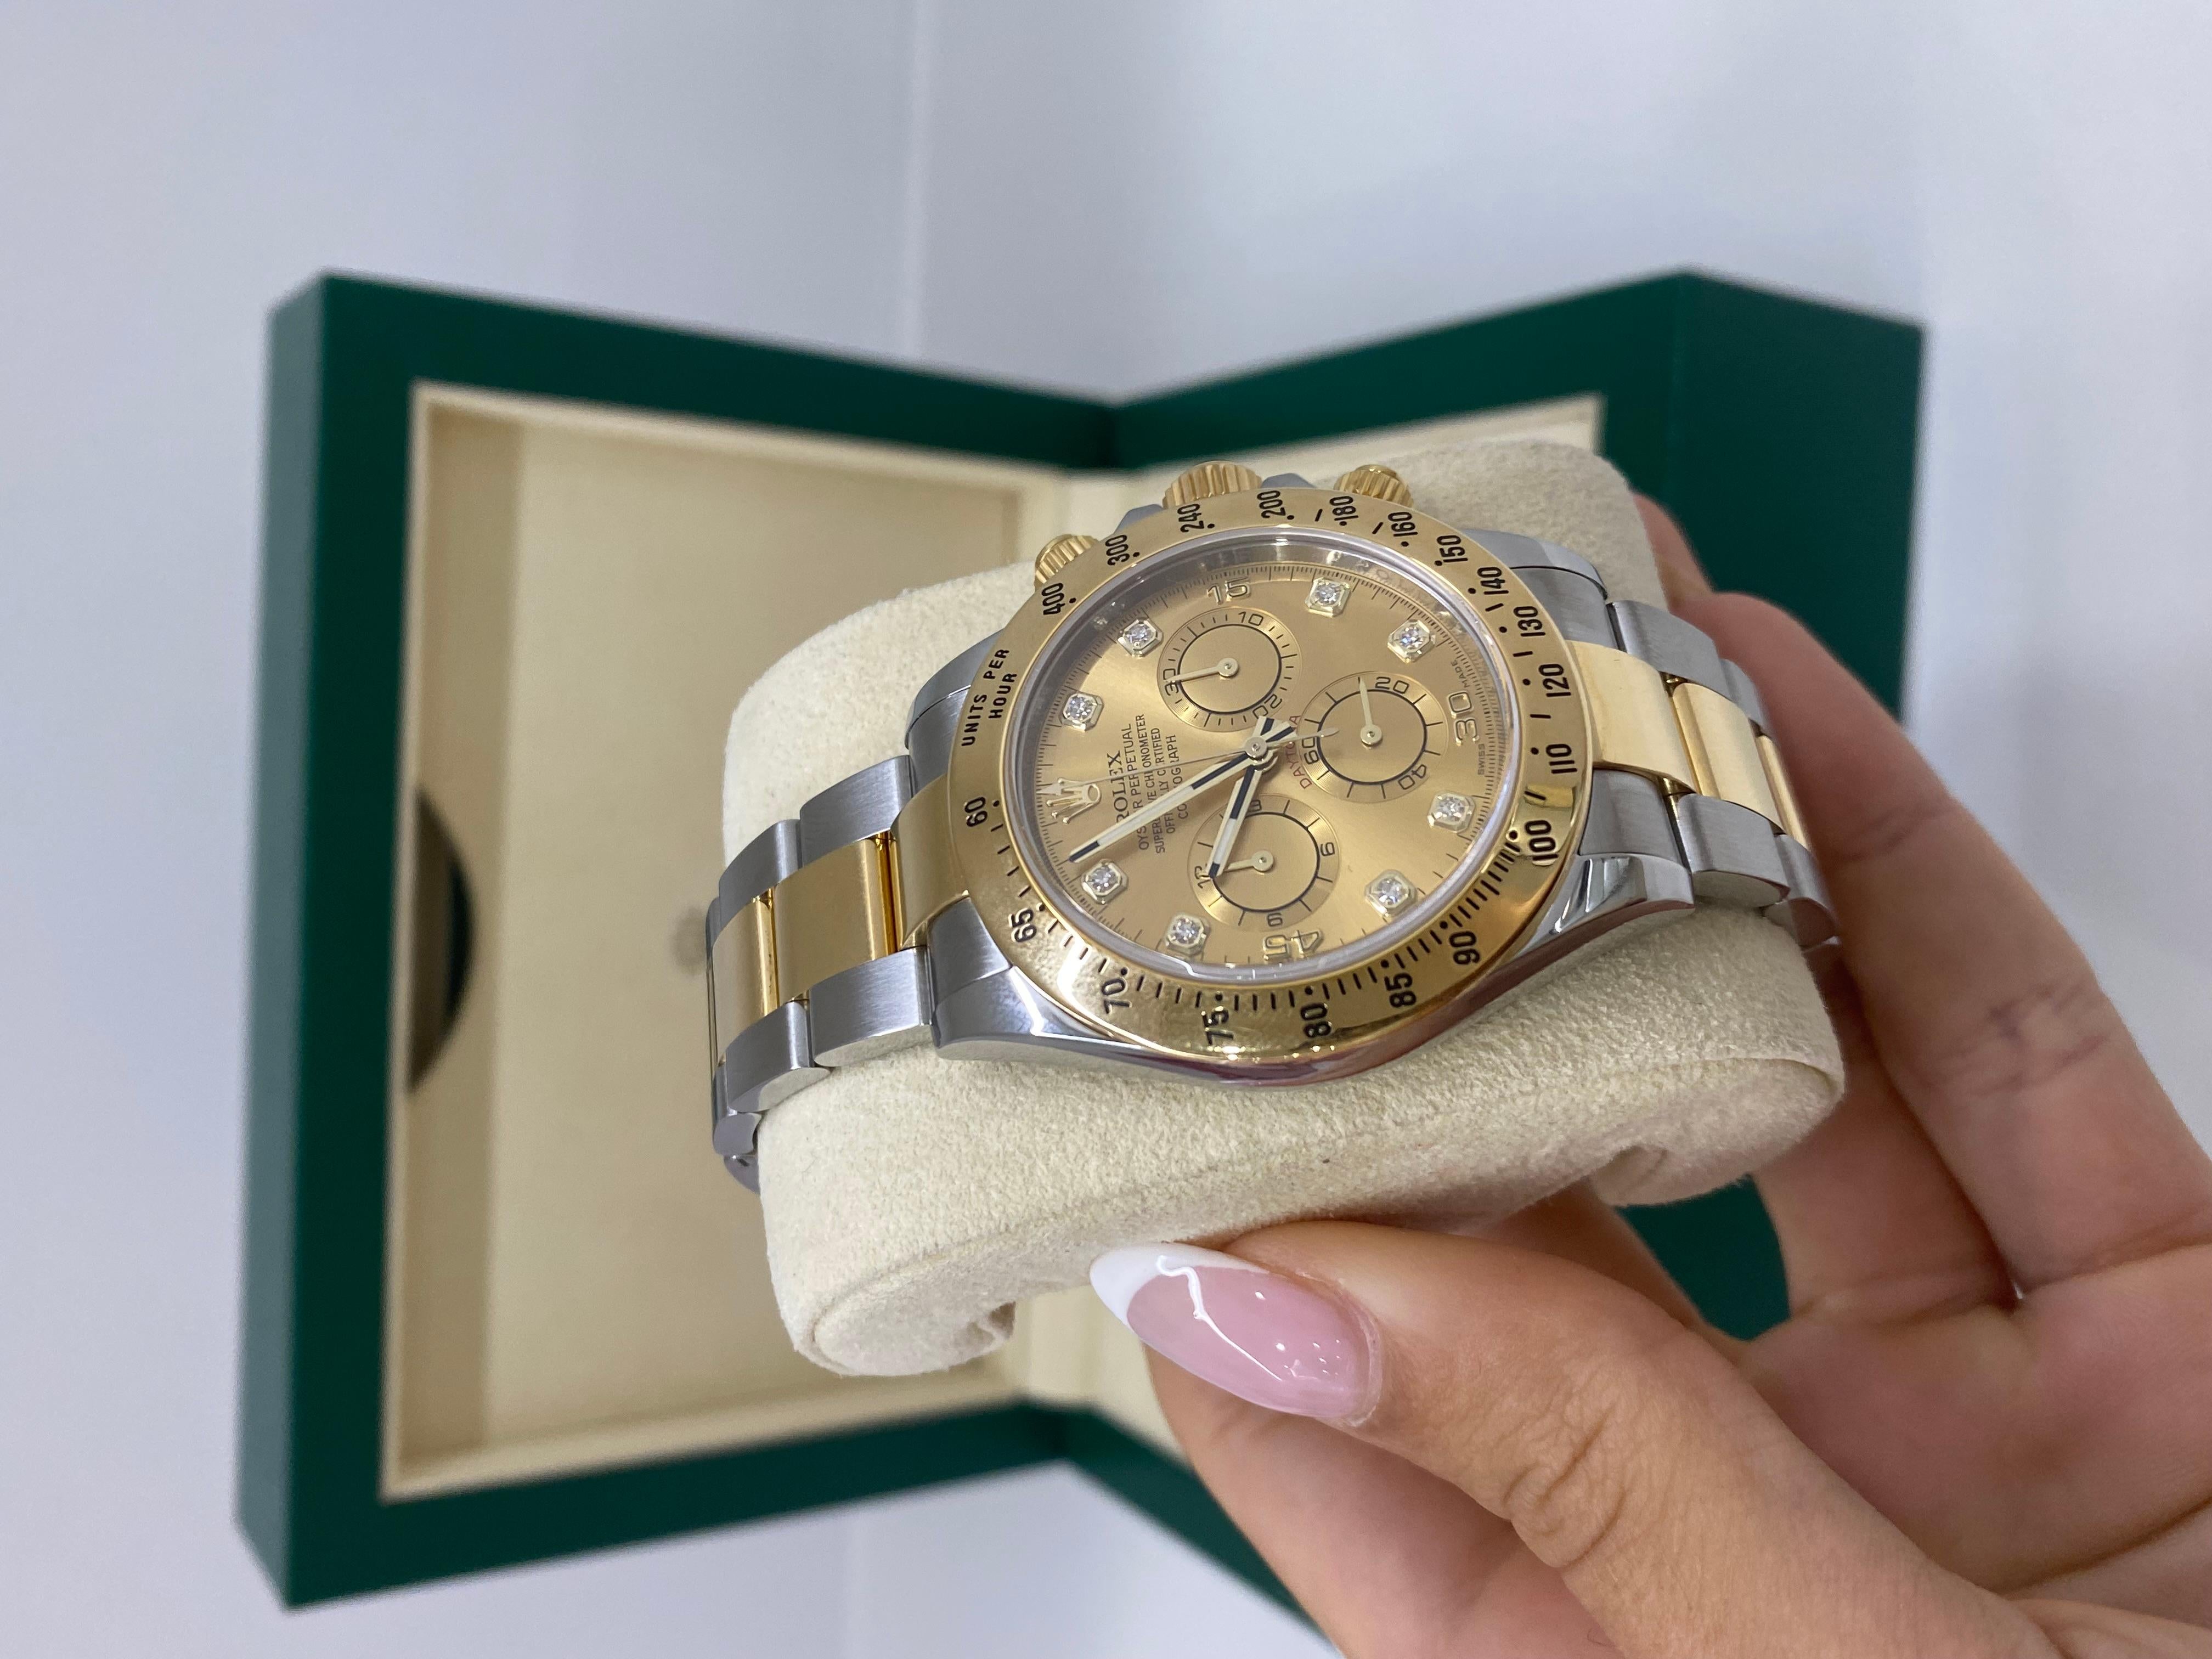 Model: Cosmograph Daytona Oystersteel & Yellow Gold Watch

40 mm 

Condition: Excellent Used Condition 

Year: 2014

Comes with: Box & papers